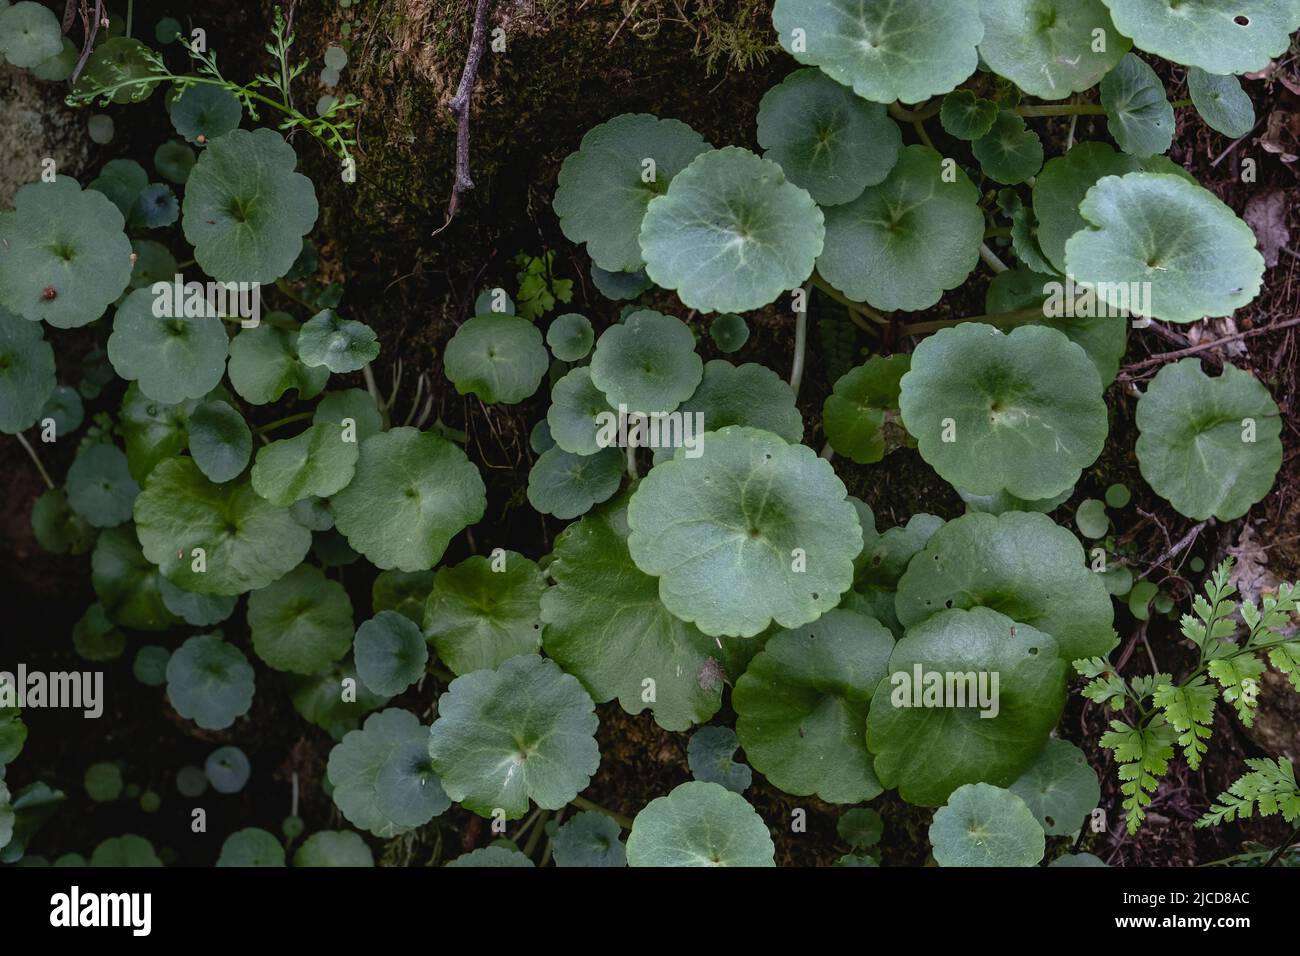 Navelwort (Umbilicus rupestris) green leaves, succulent plant growing on a wet shady mossy forest Stock Photo